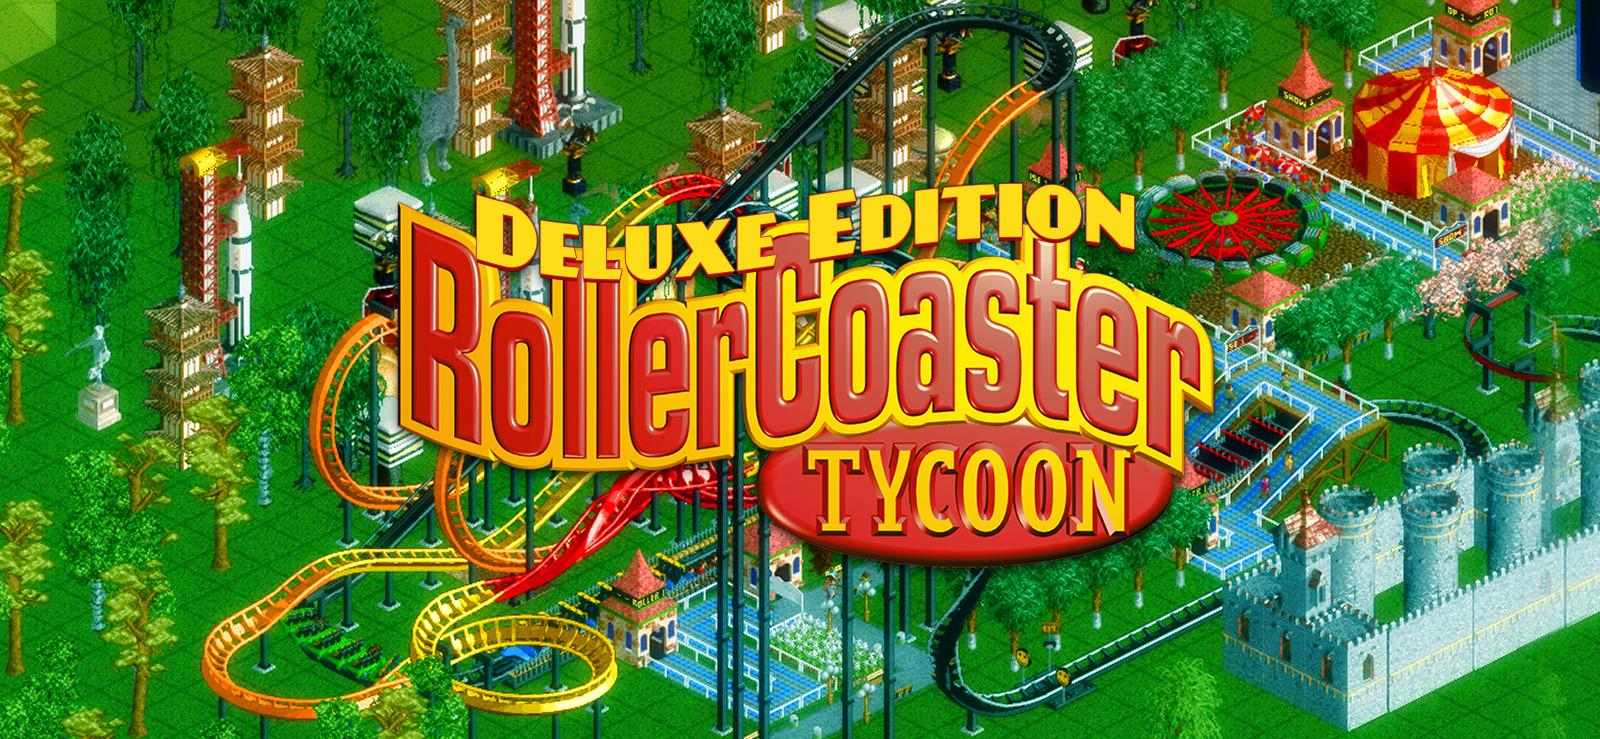 Roller Coaster Tycoon Deluxe on GOGcom